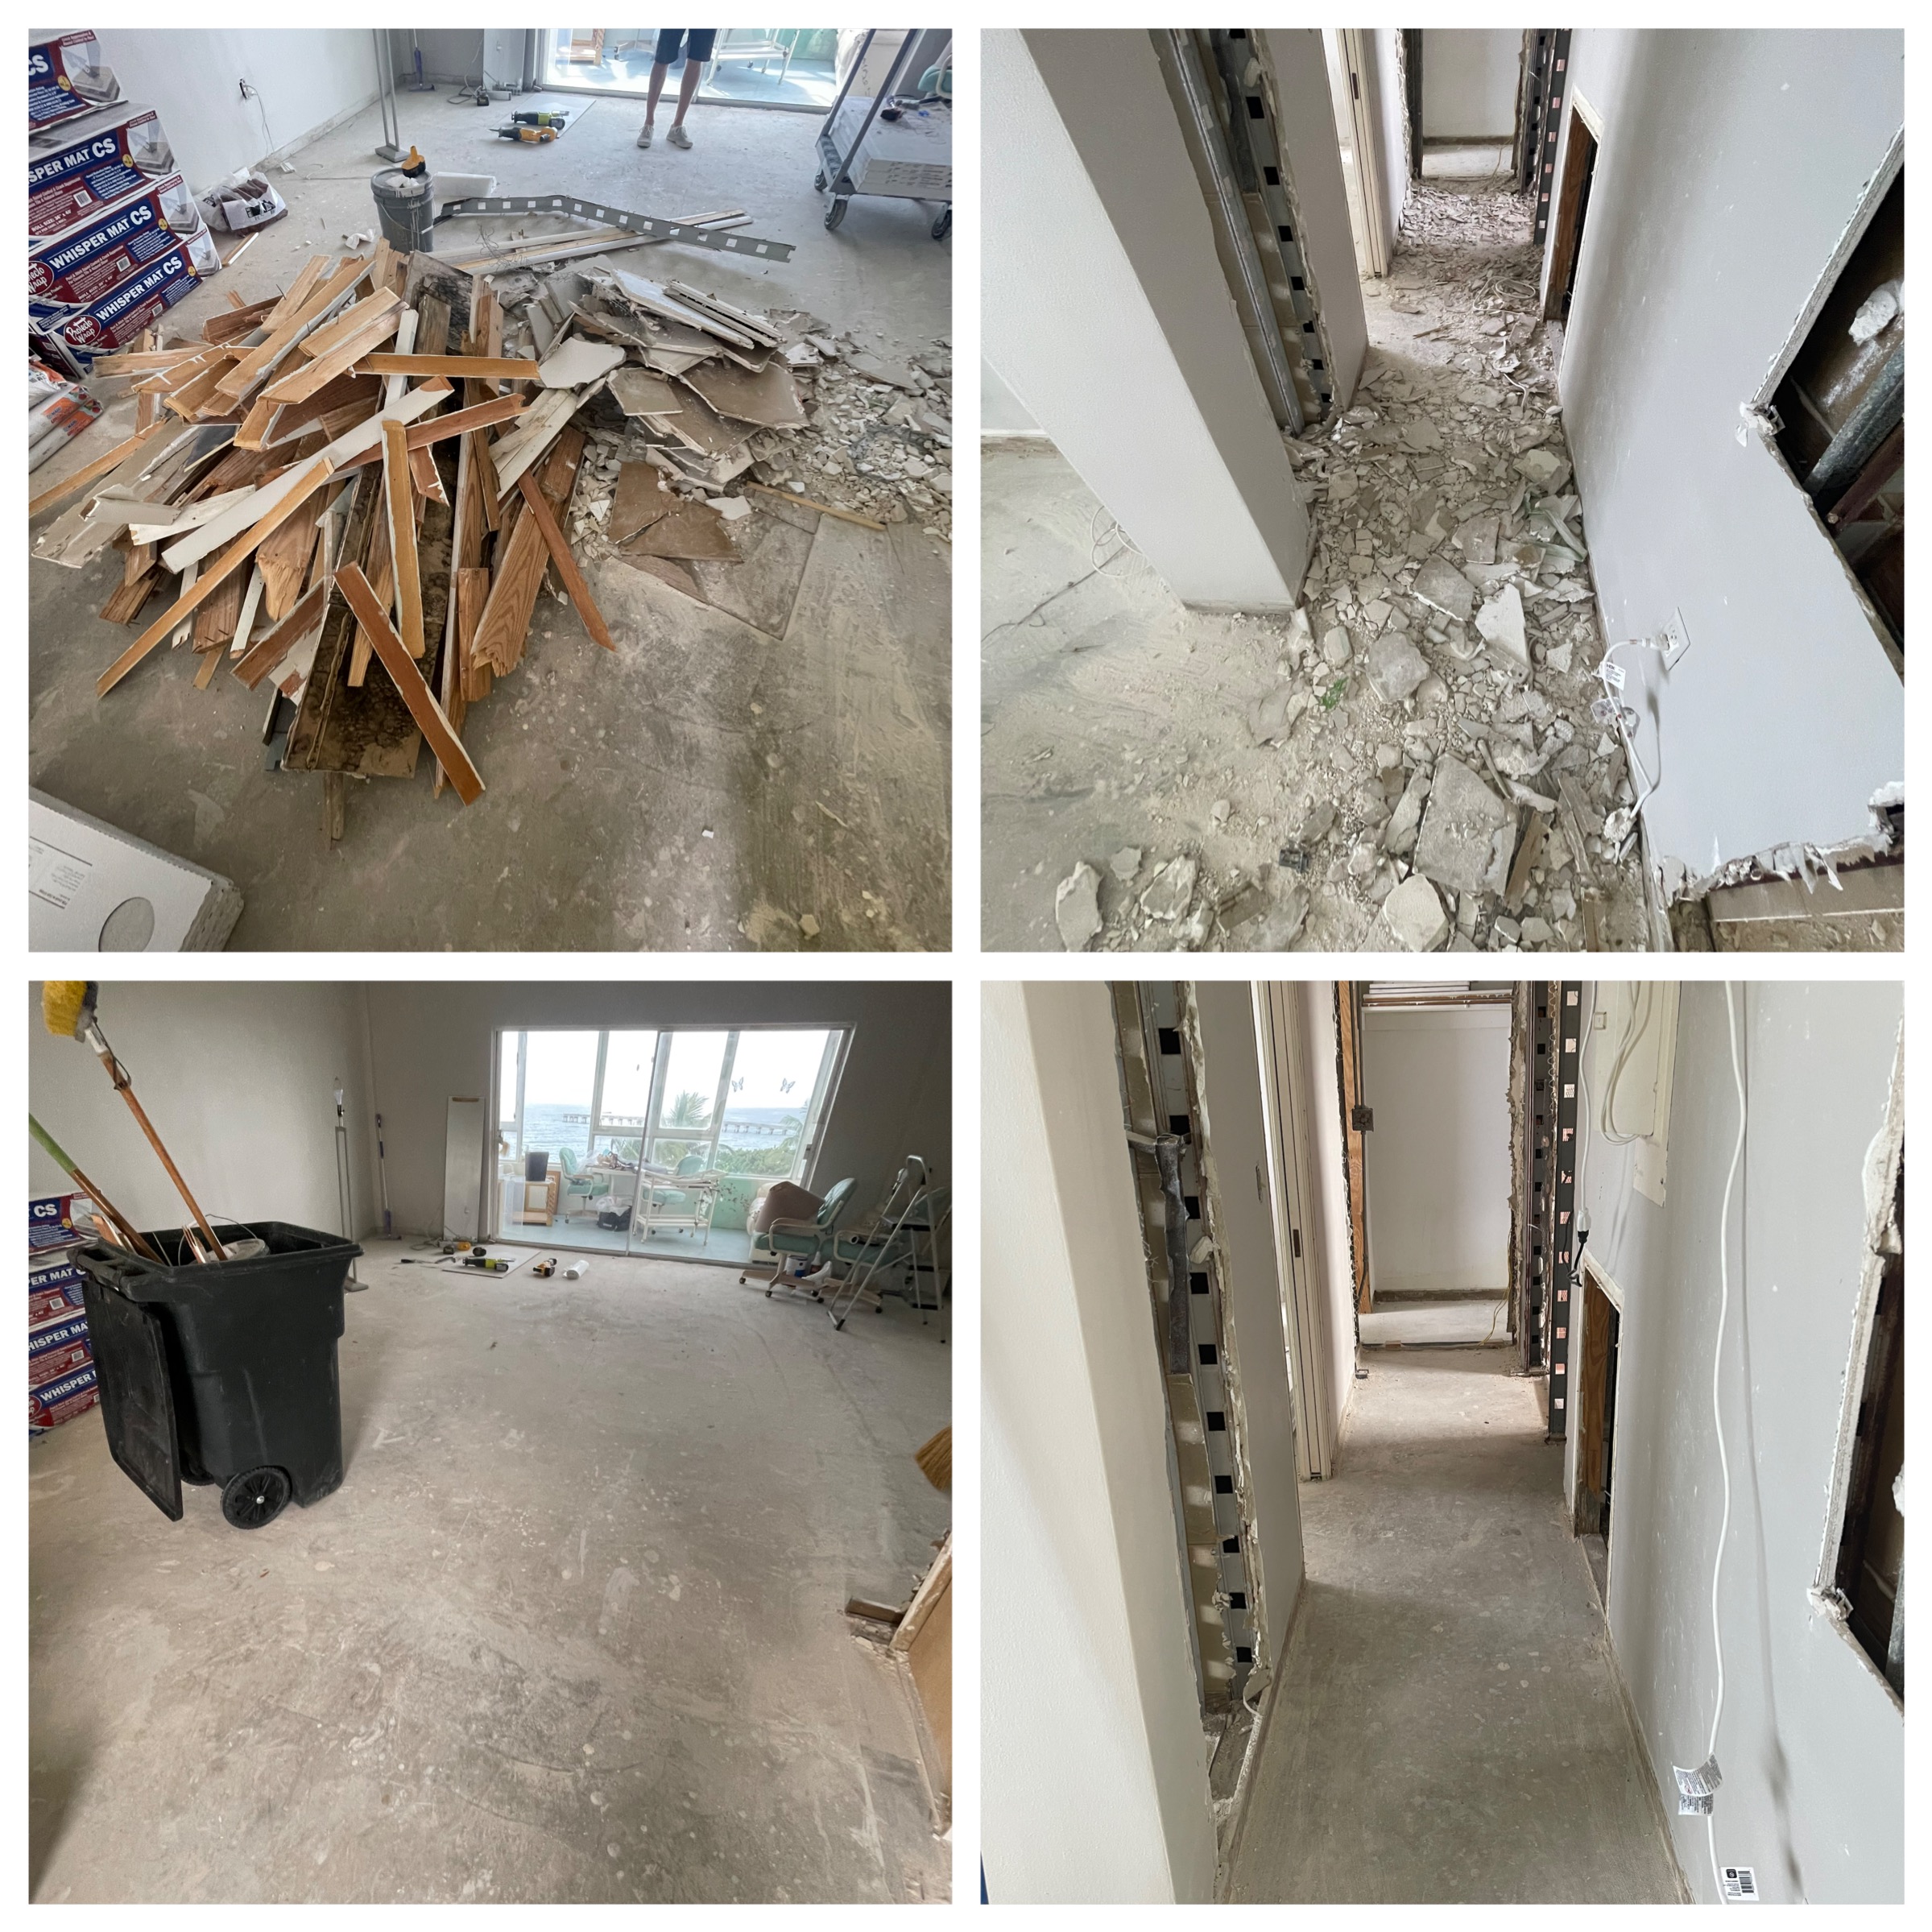 Condominium wood, drywall, studs, and other Construction Debris getting removed from 5th floor in Palm Beach, Florida.